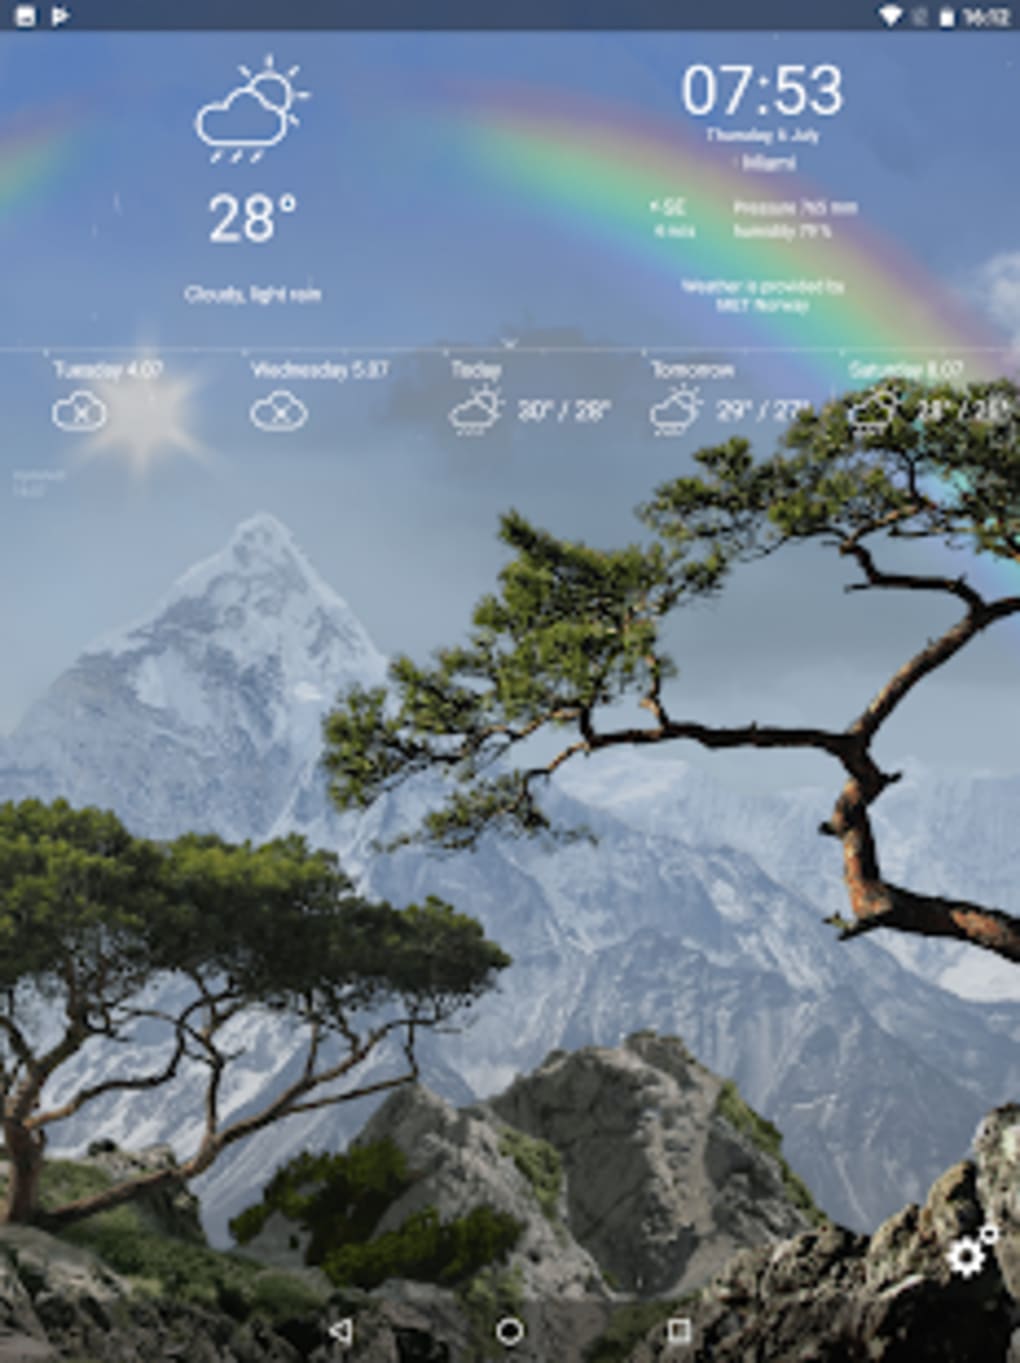 Realistic Weather All Seasons Live Wallpaper APK cho Android - Tải về